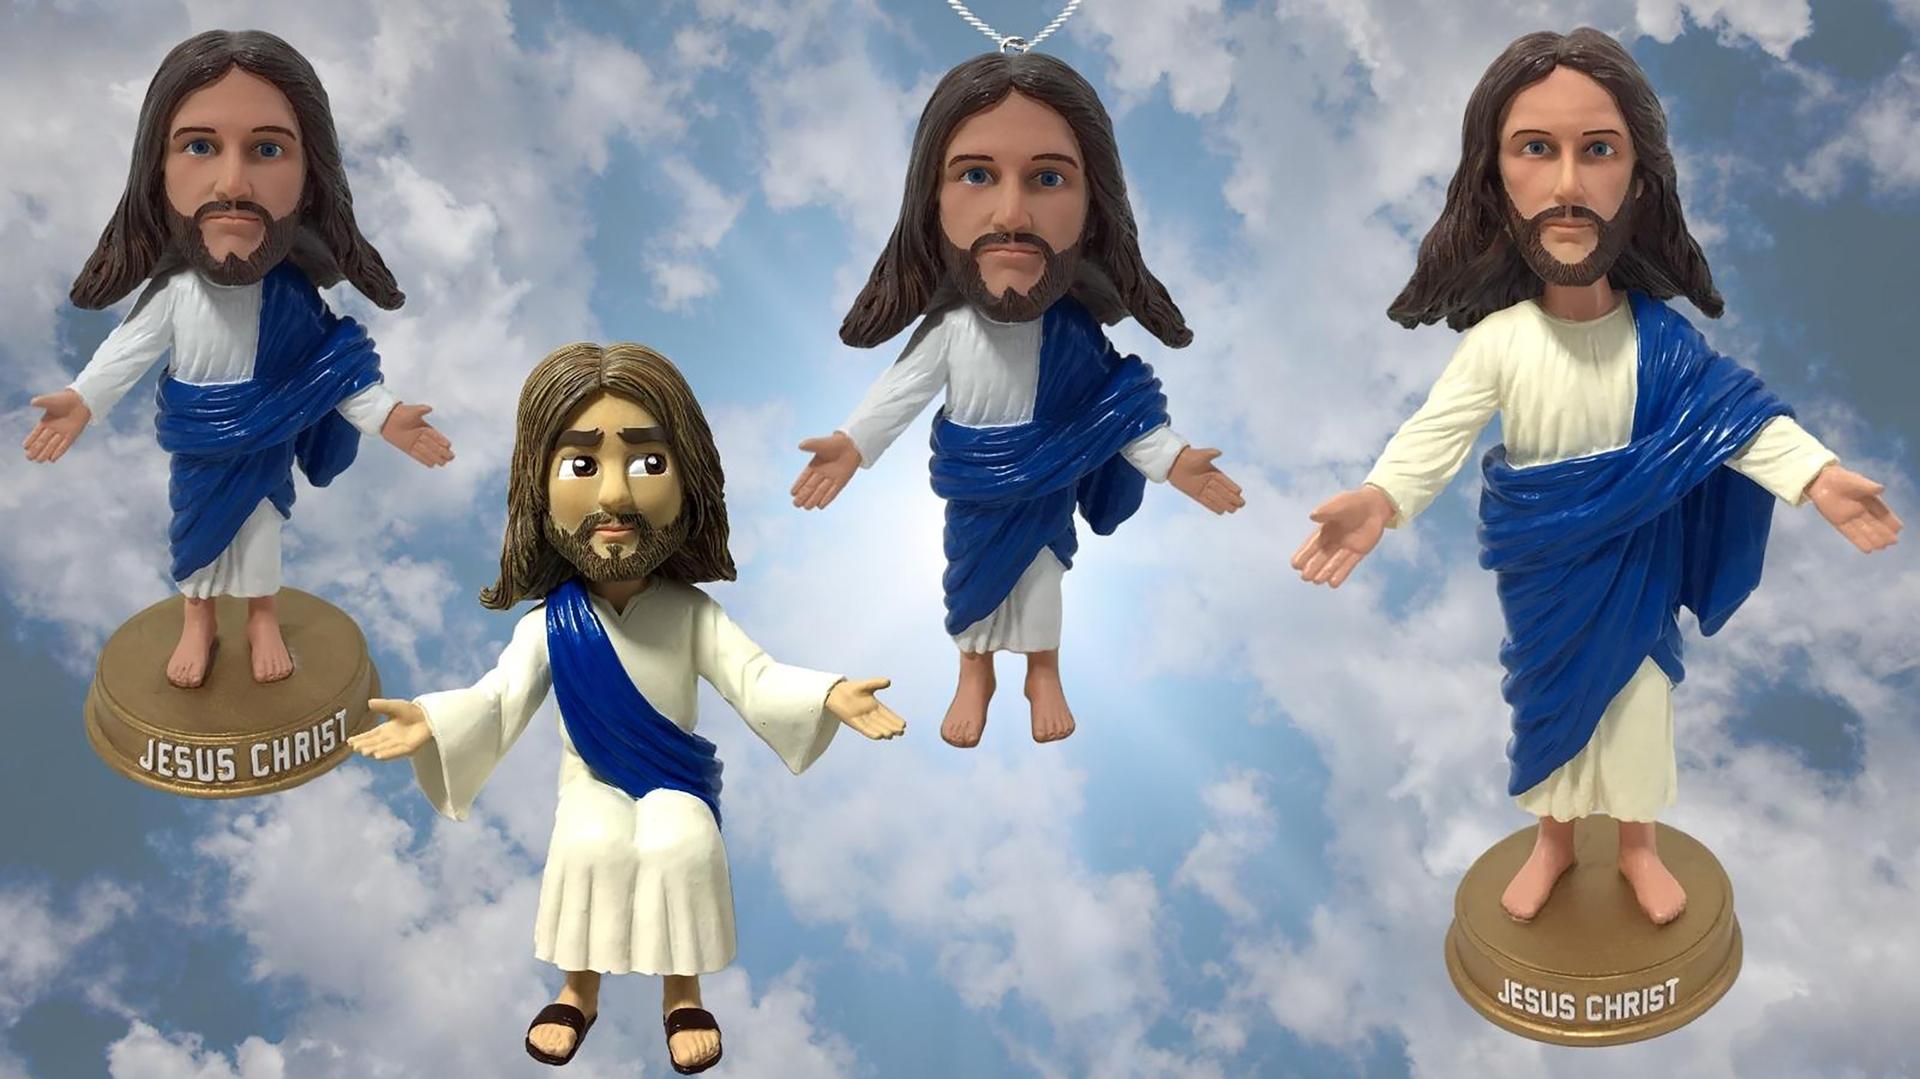 Just in time for Christmas: Four Jesus bobbleheads, including an ornament